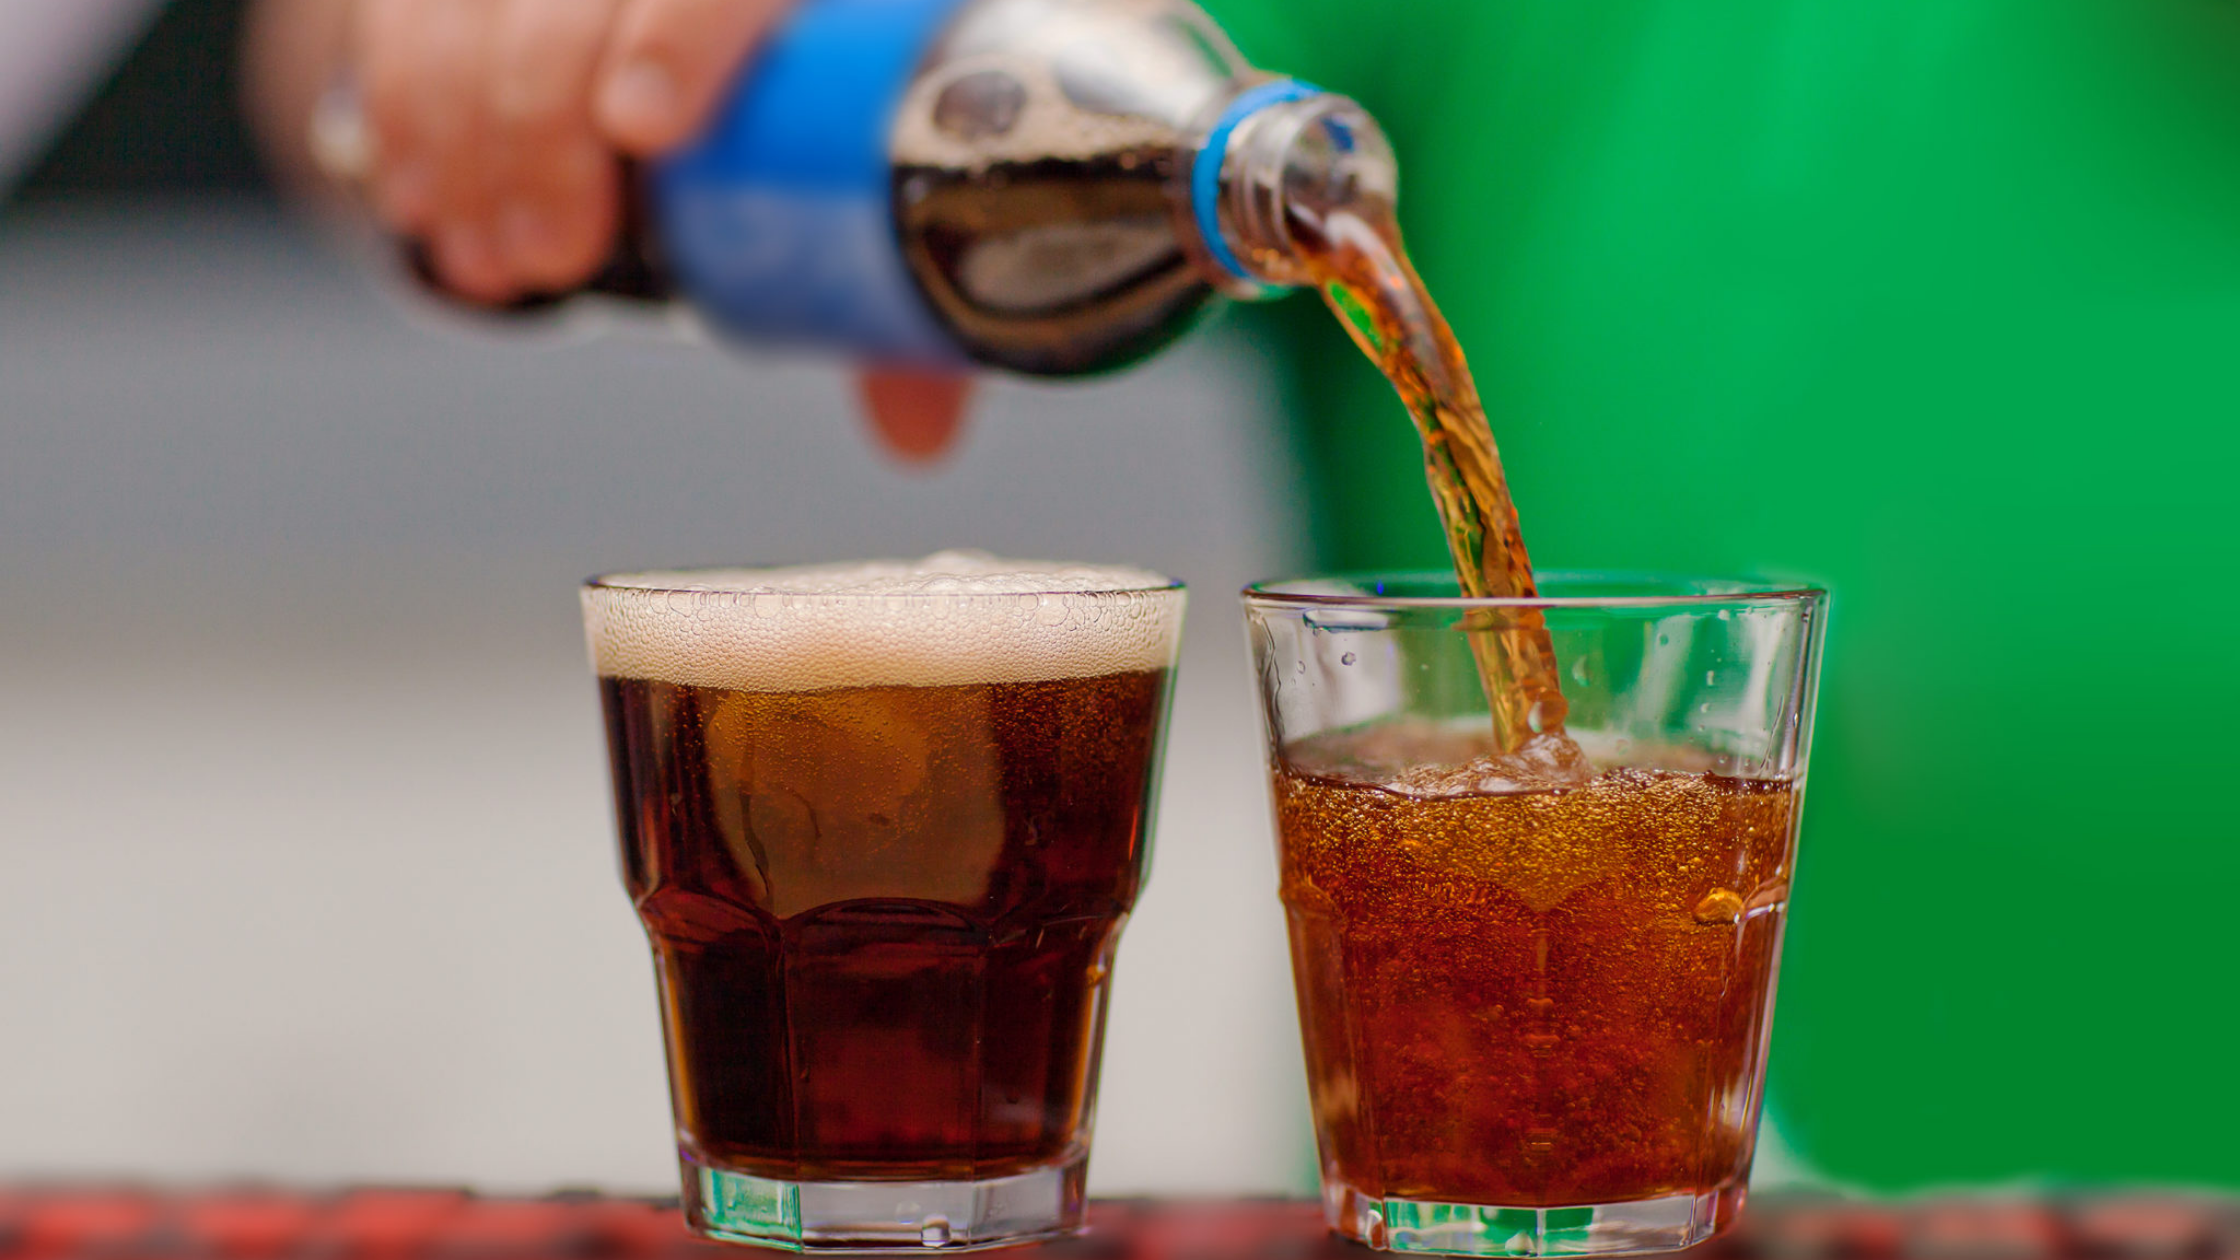 5 Reasons You Should Stop Consuming Soft Drinks Now